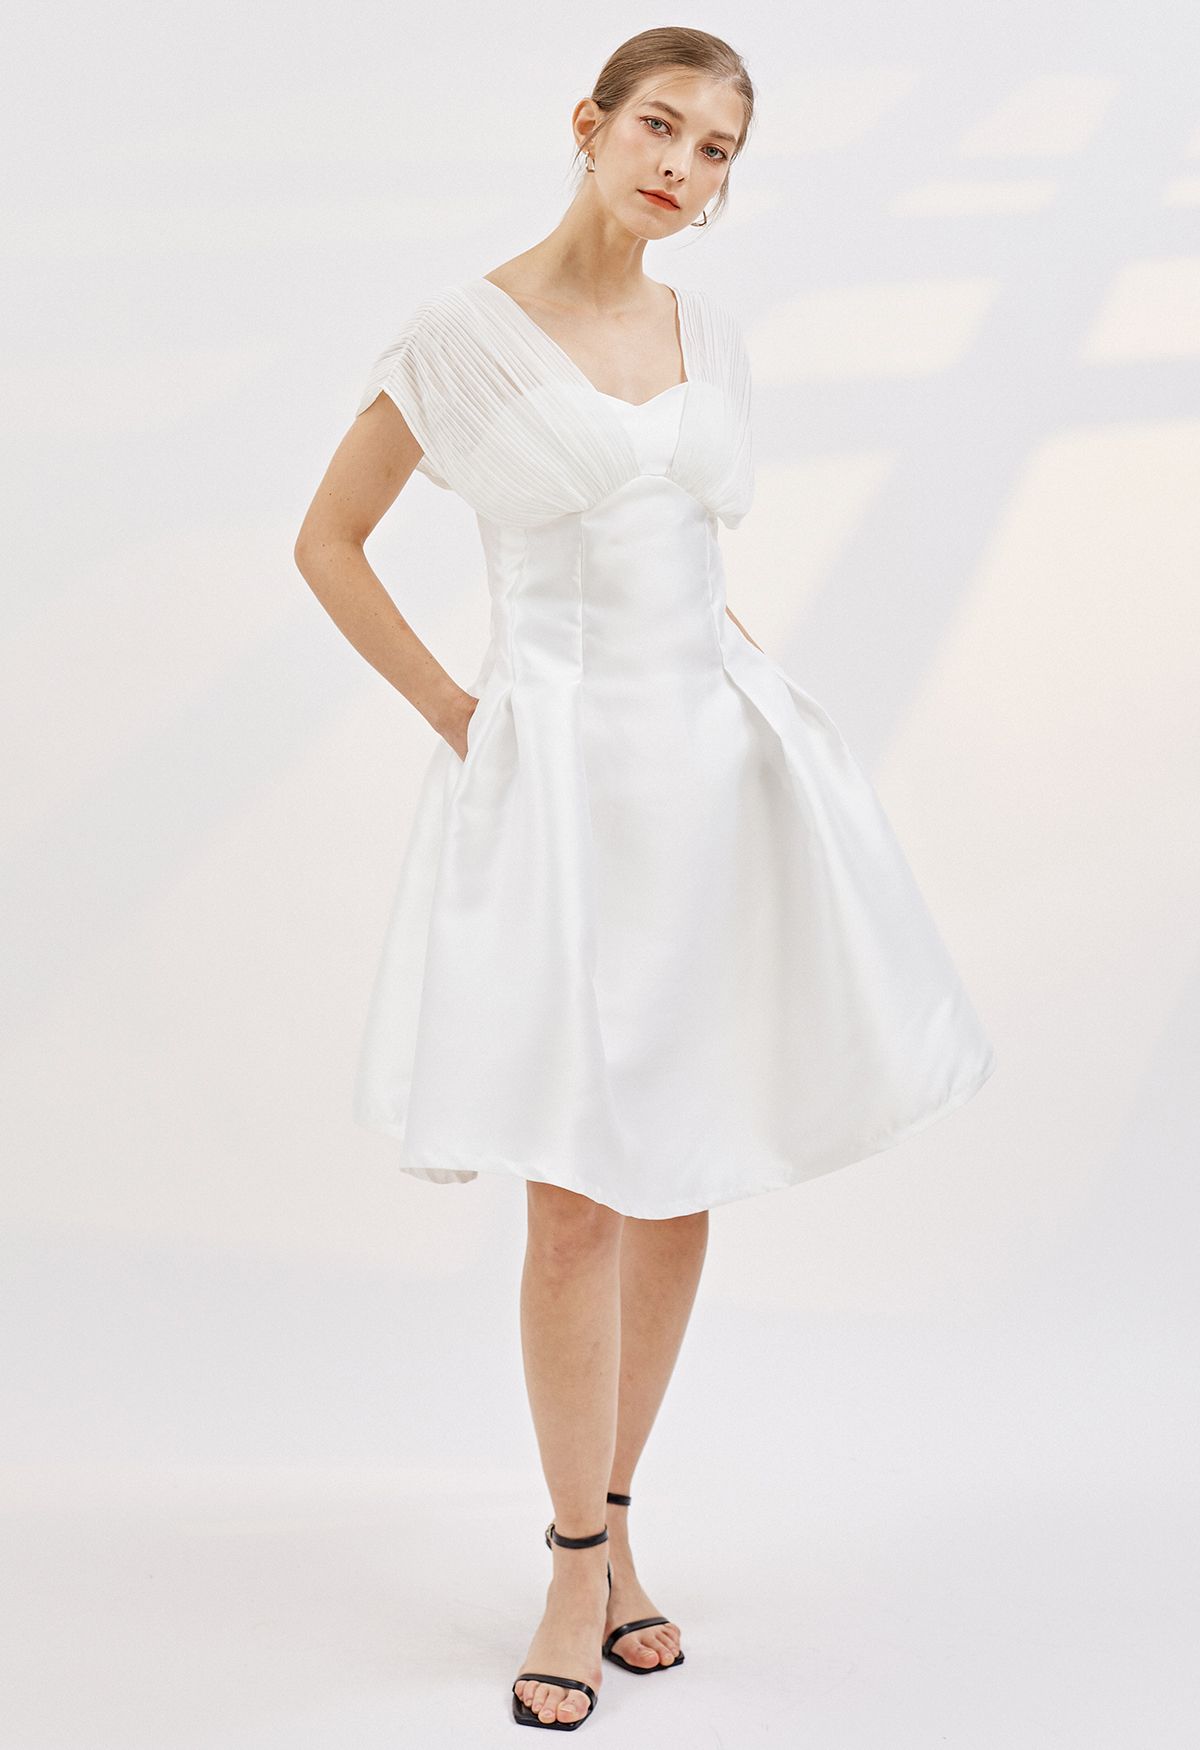 Pleated Chiffon Spliced Cocktail Dress in White